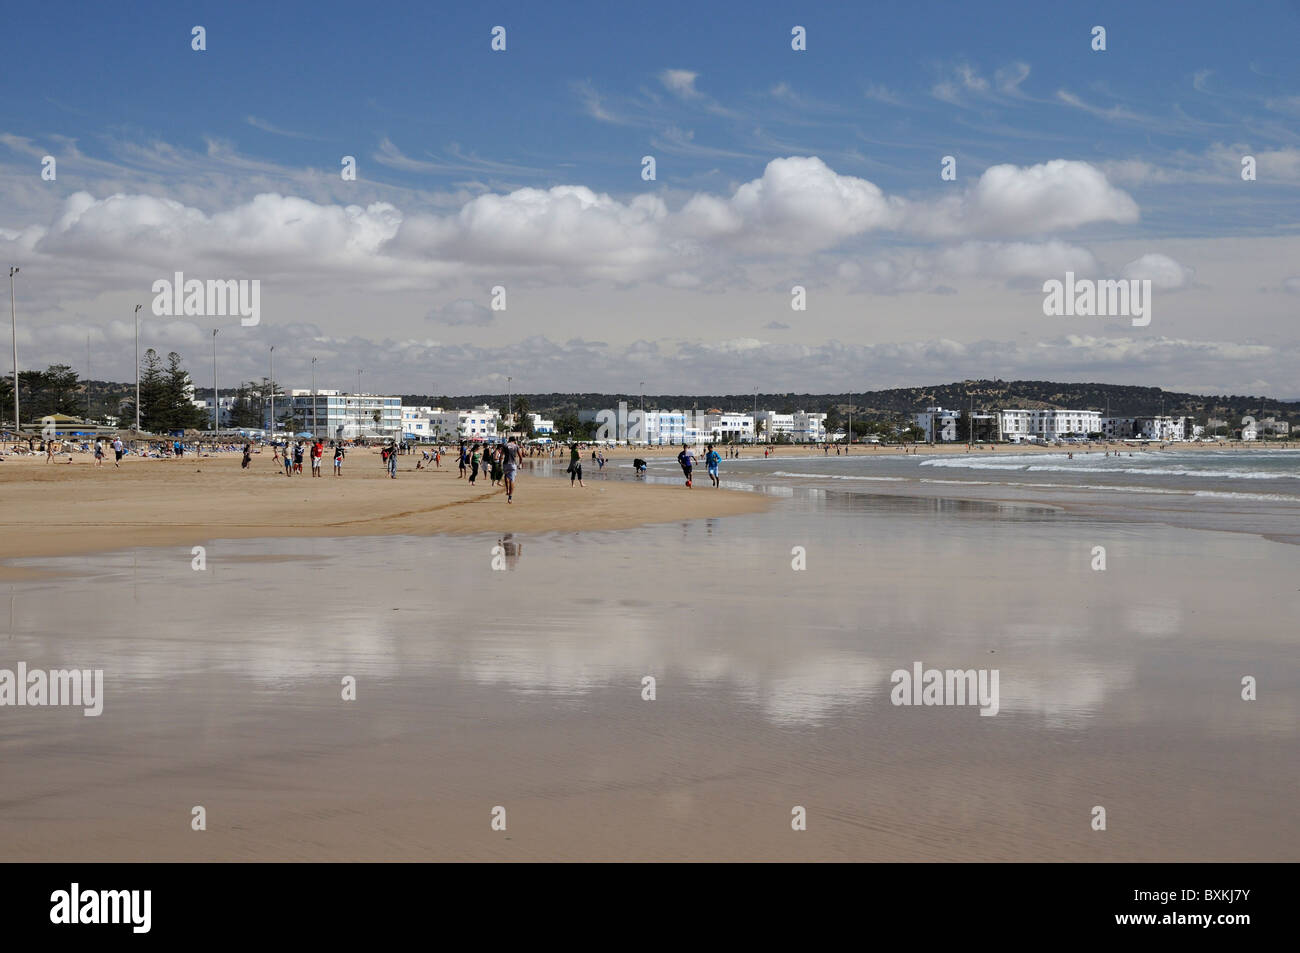 Beach scene with cloud reflections on sand Stock Photo